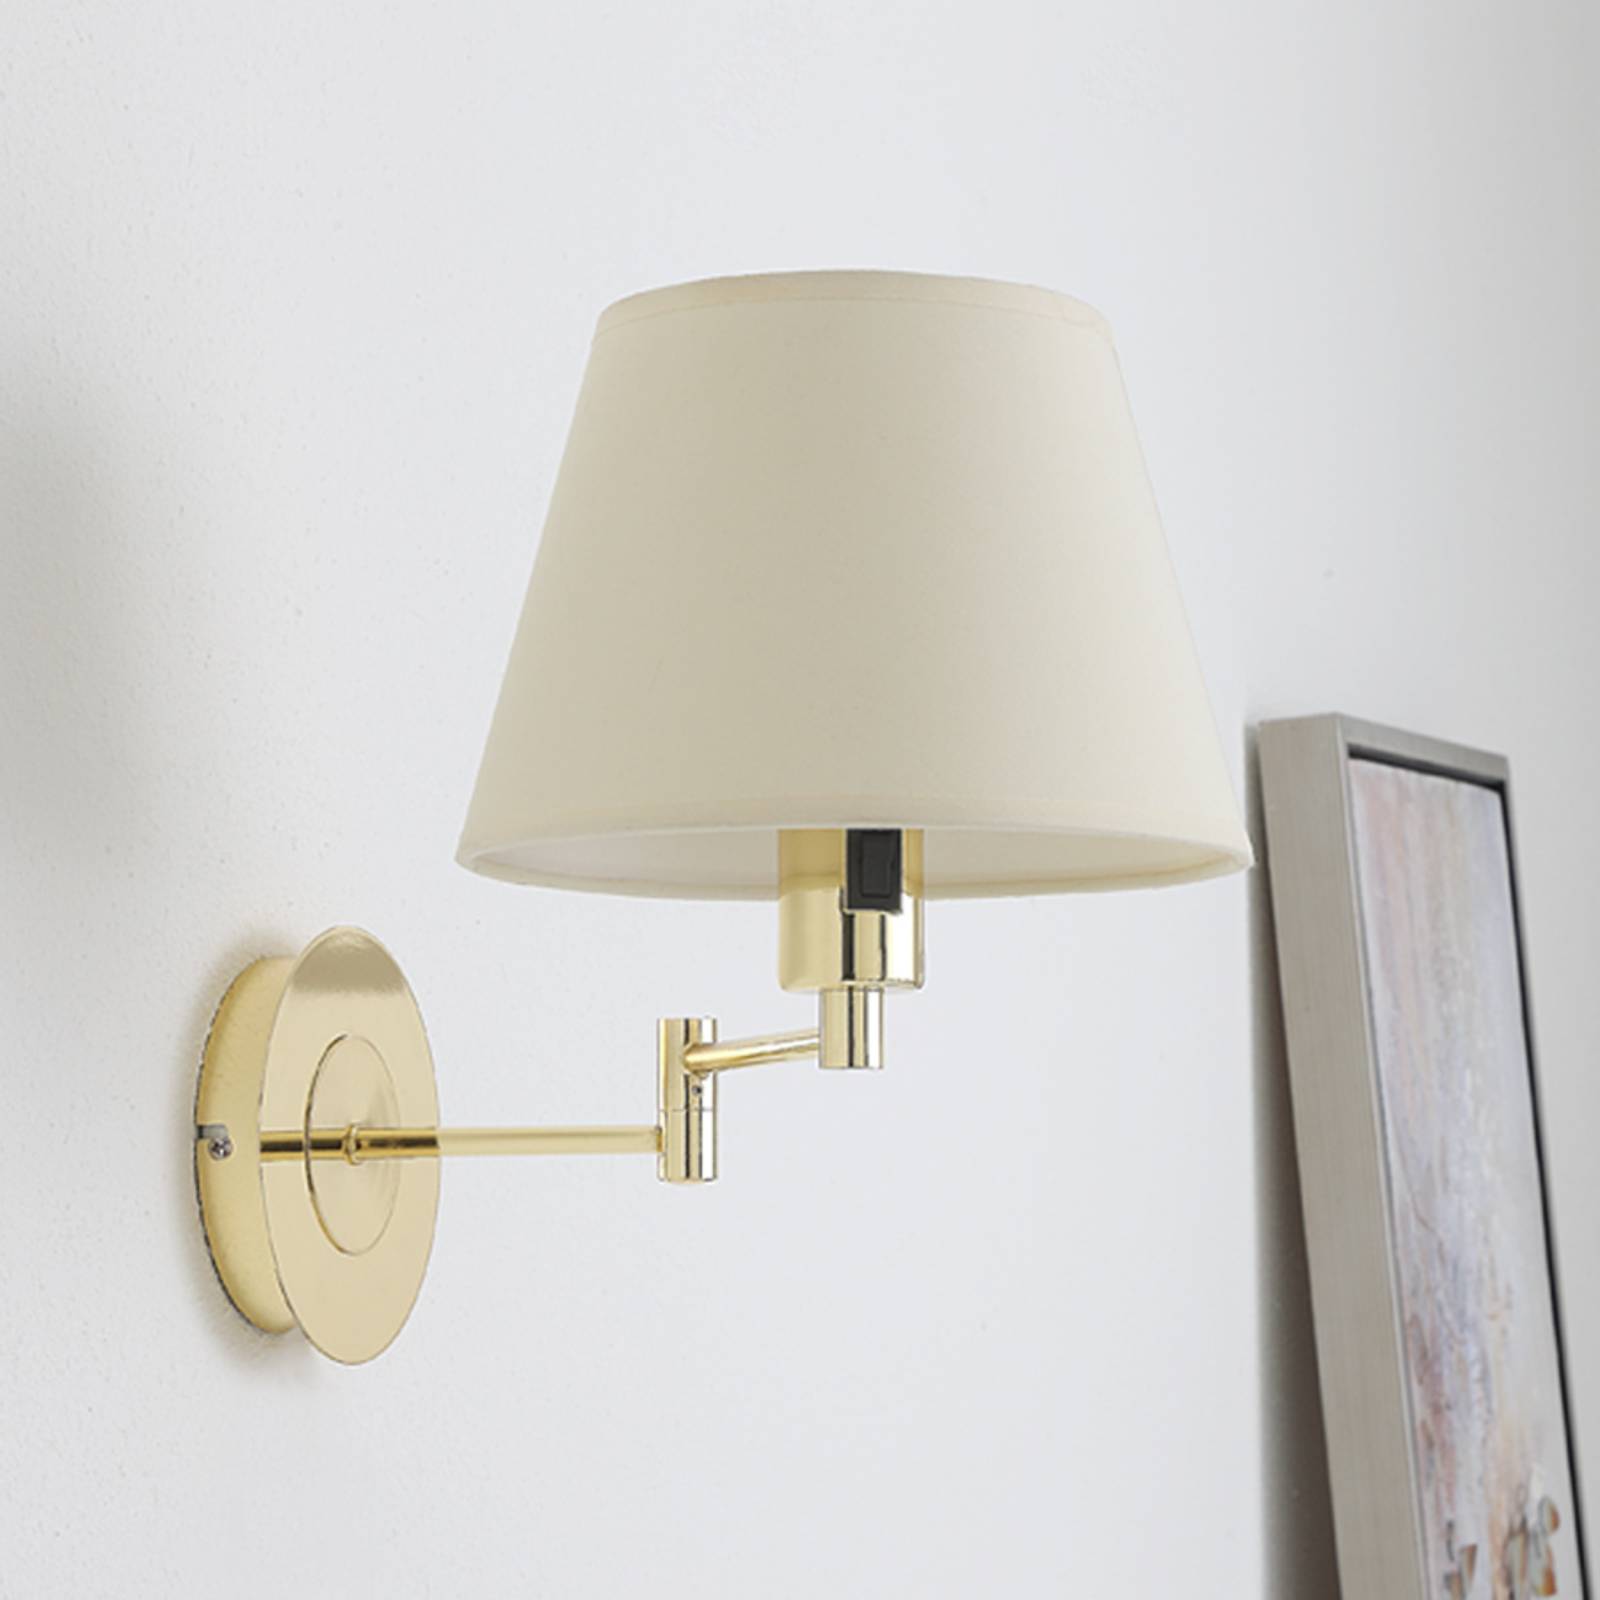 Photos - Chandelier / Lamp Lindby Pola wall light, extendible lampshade, brass 